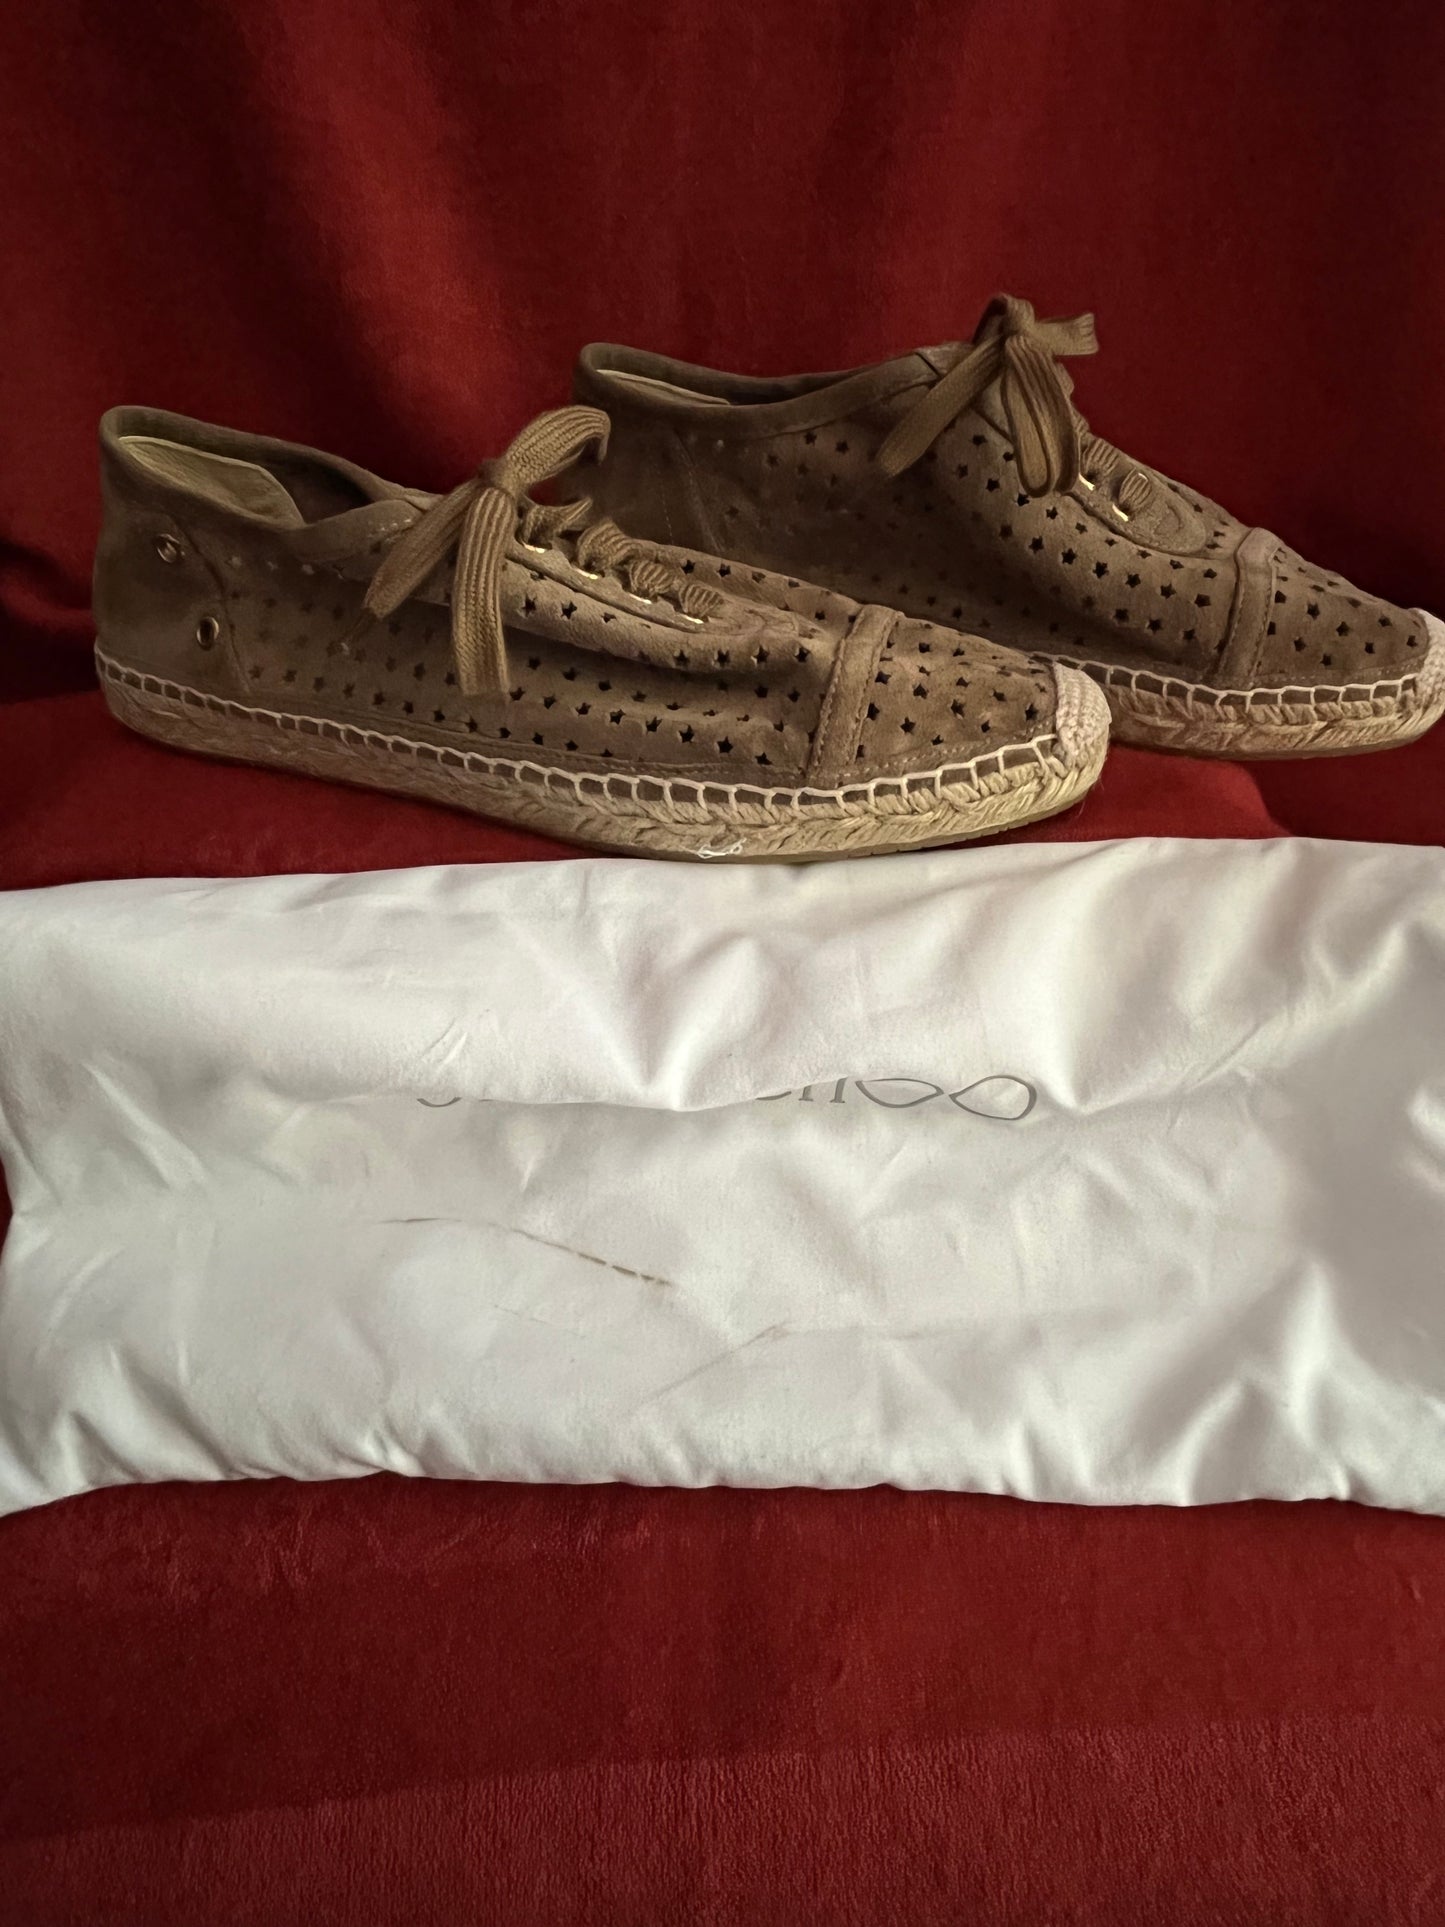 Jimmy Choo Suede Tie Espadrilles Made in Spain-Size 8 (No Box)